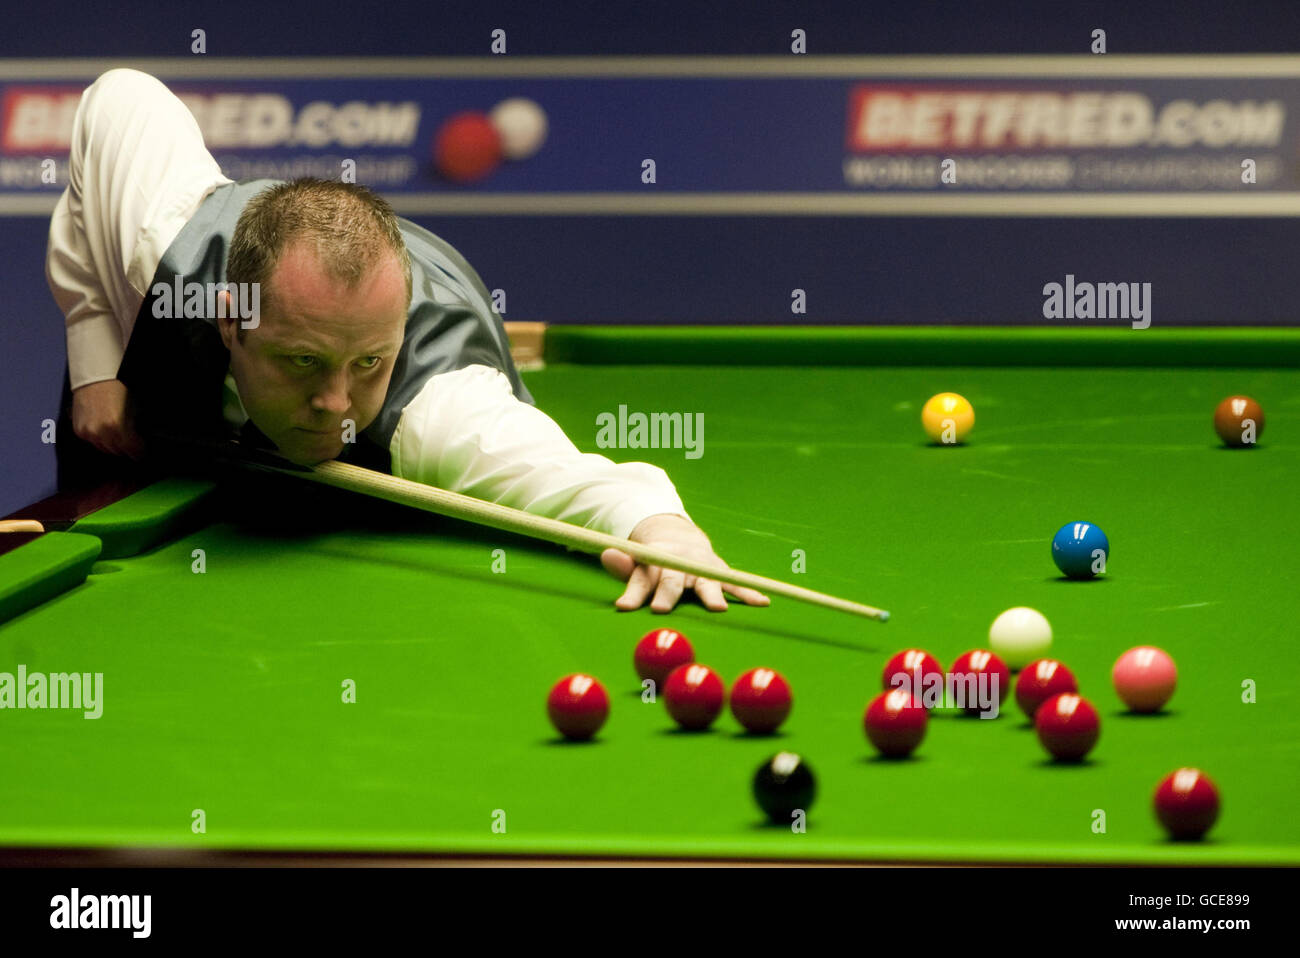 John Higgins in action against Barry Hawkins during the Betfred World Snooker Championships at the Crucible Theatre, Sheffield Stock Photo